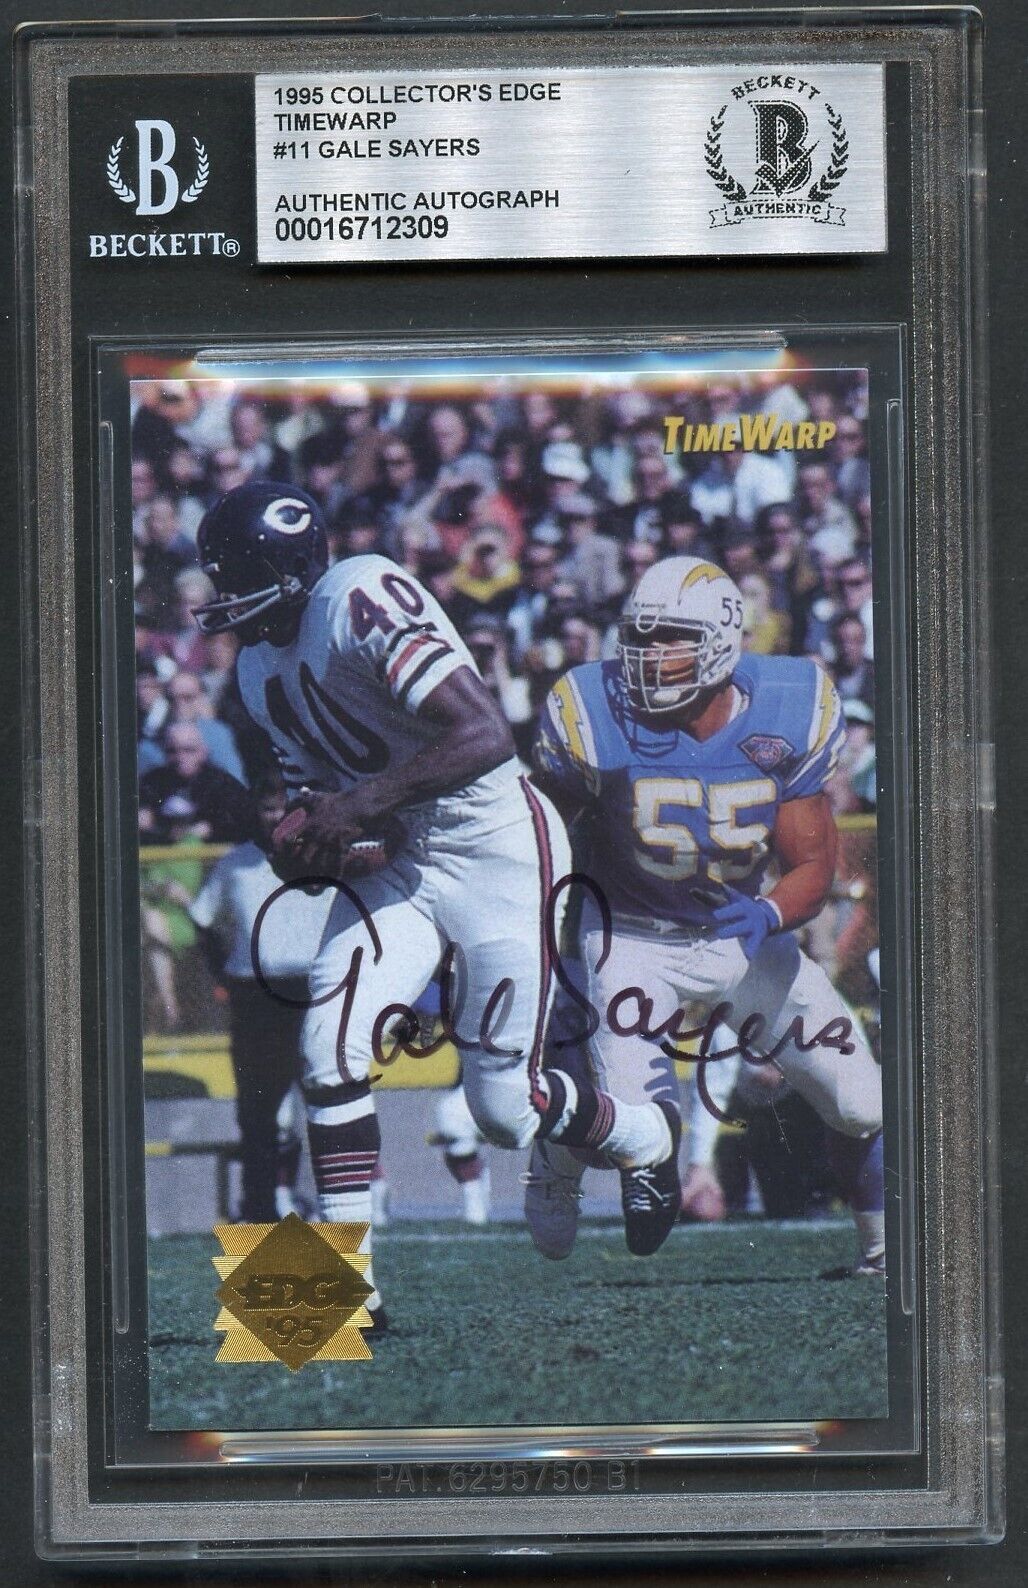 Gale Sayers #11 signed autograph auto 1995 Collector's Edge Timewarp Card BAS